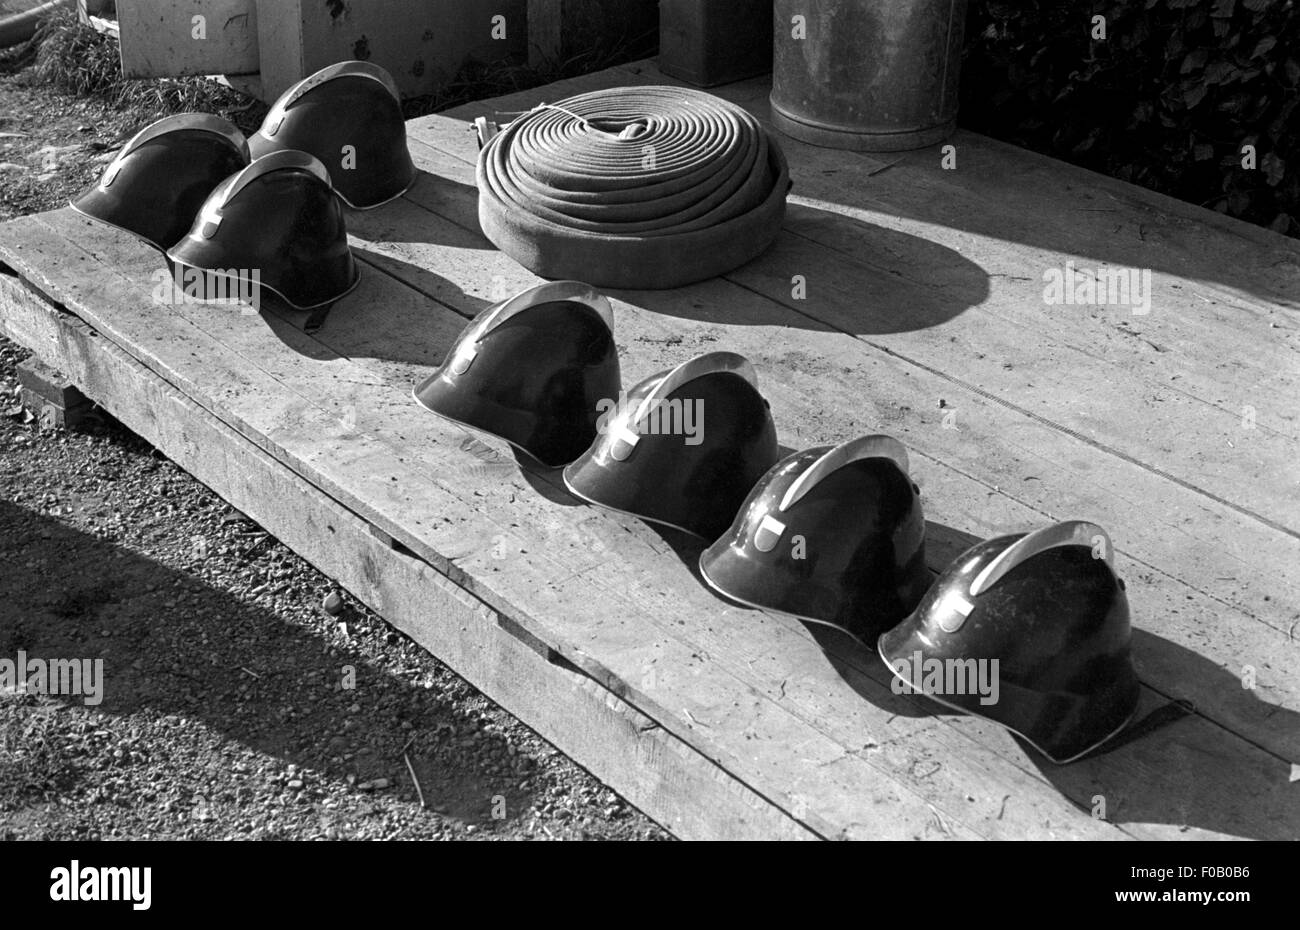 Firefighter's helmets and hose Stock Photo